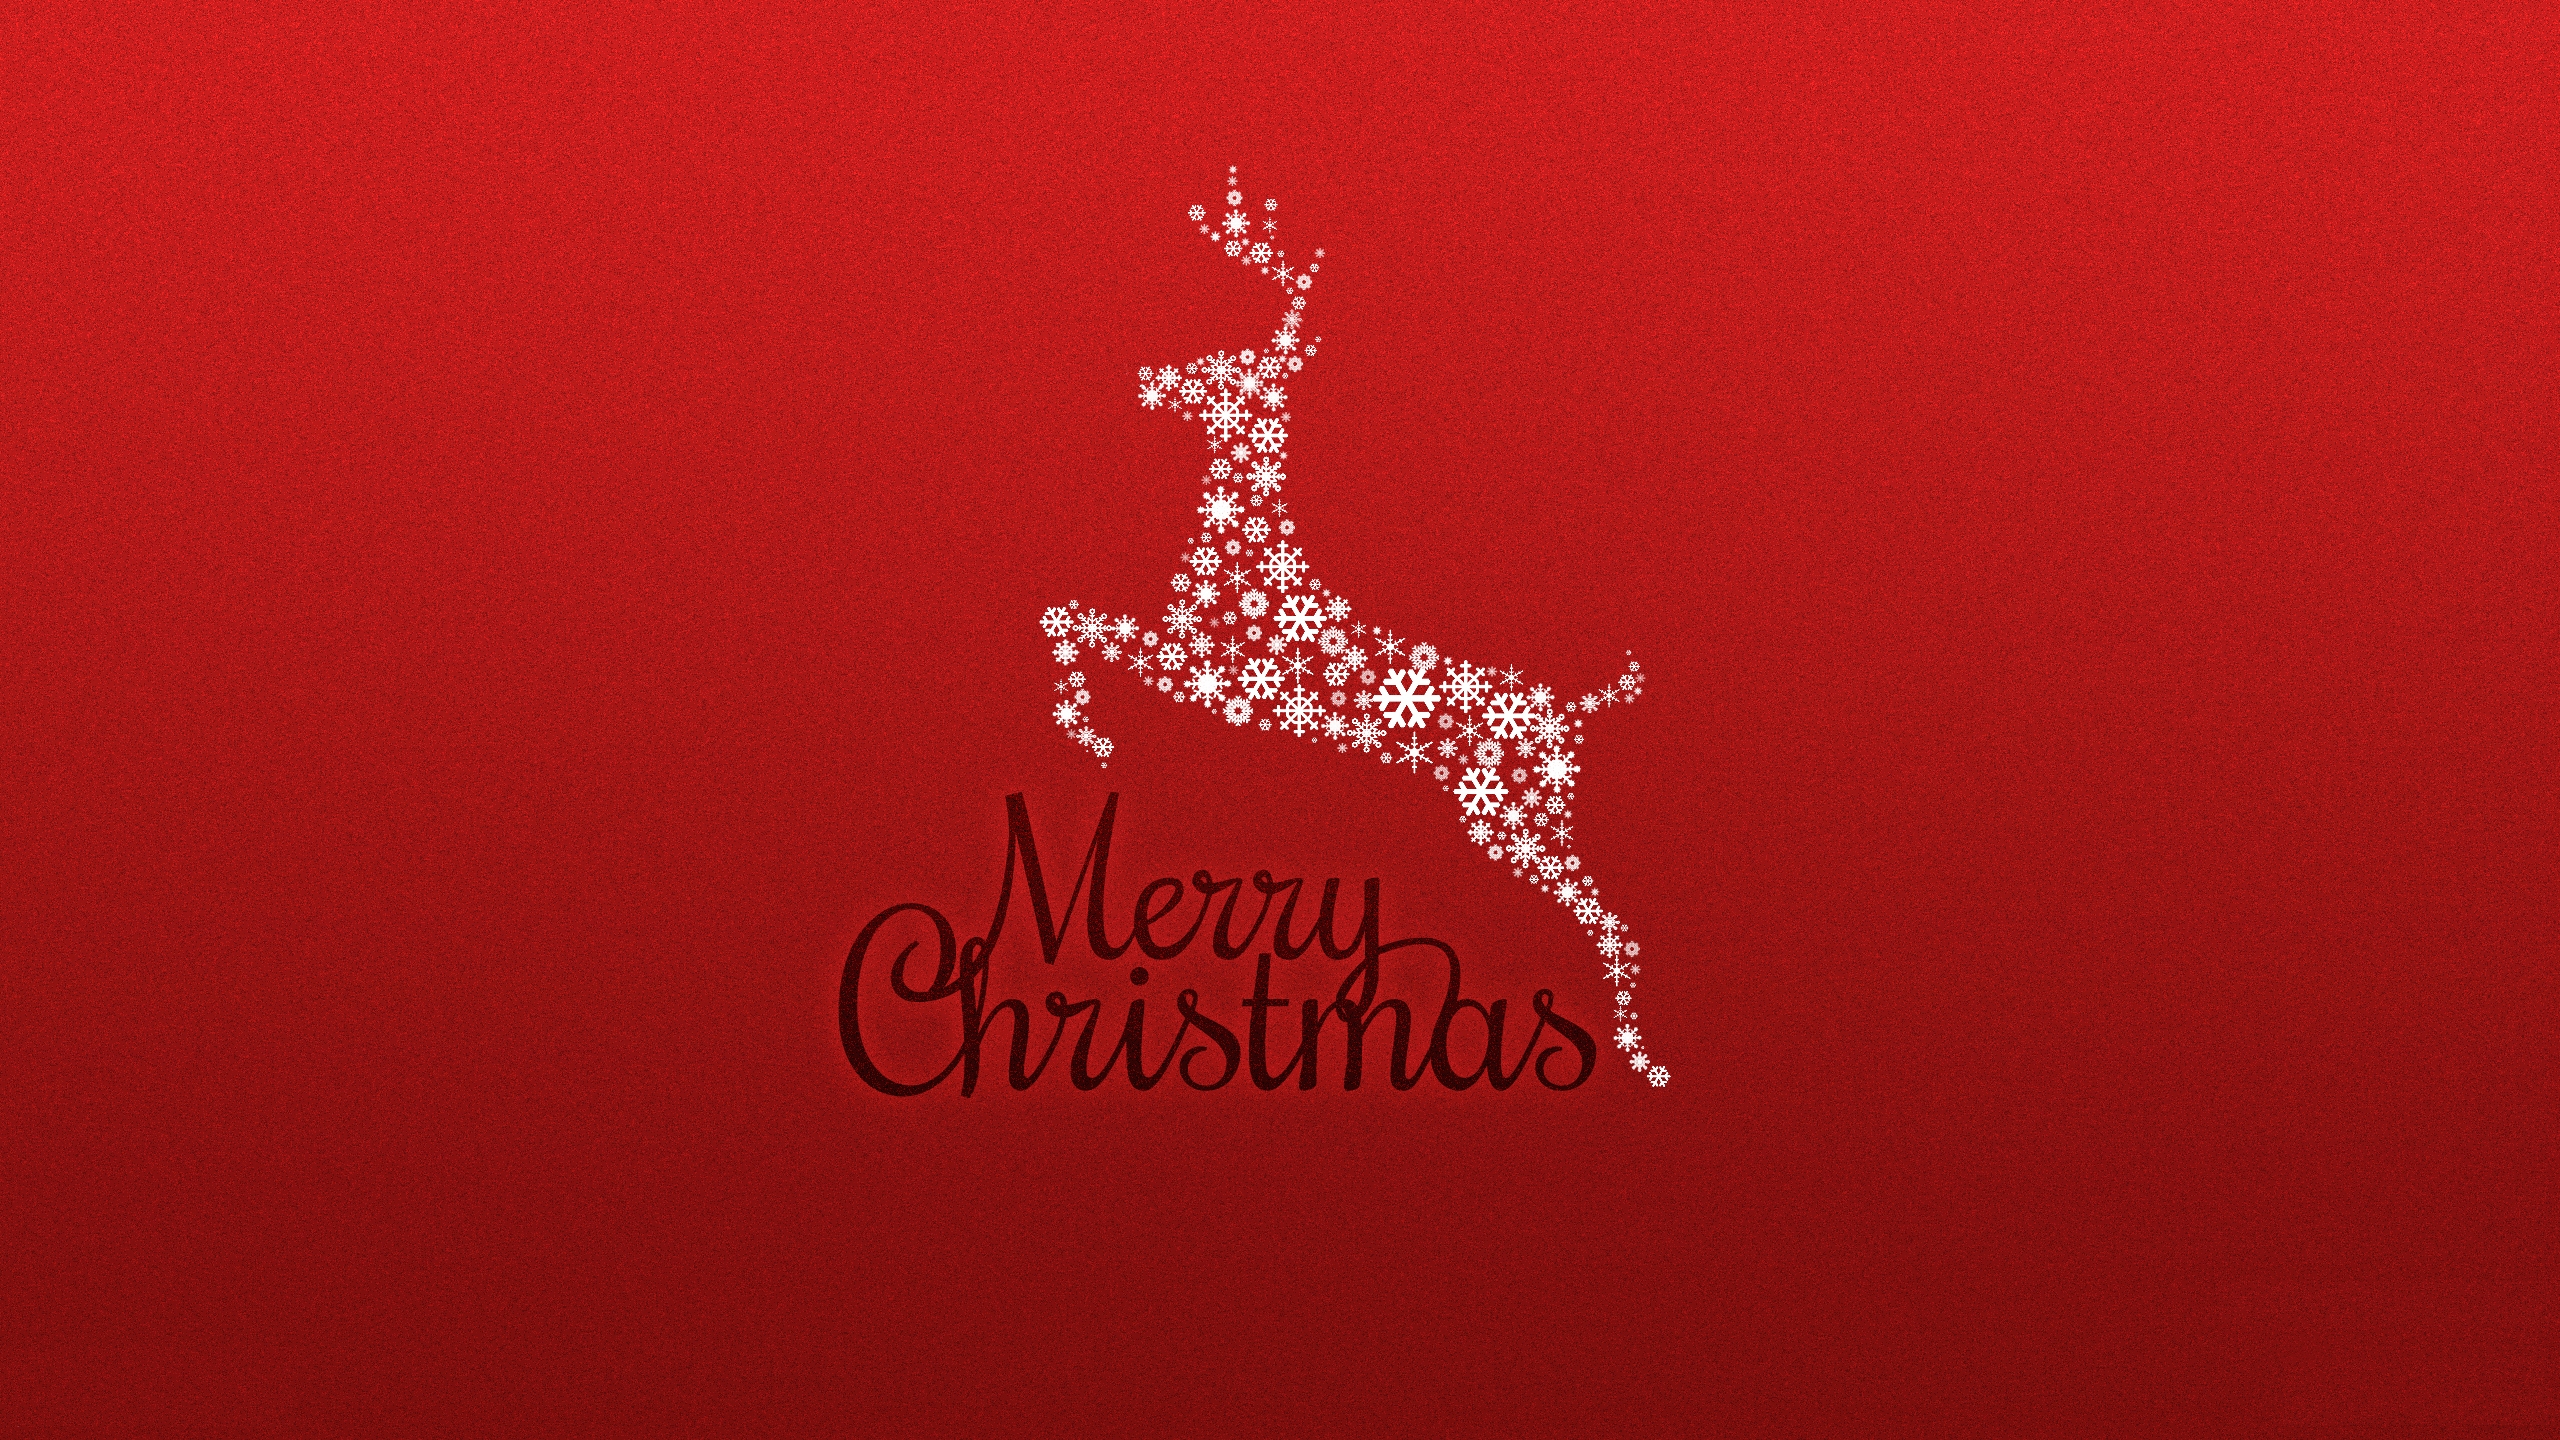 Merry Christmas Red Card for 2560x1440 HDTV resolution